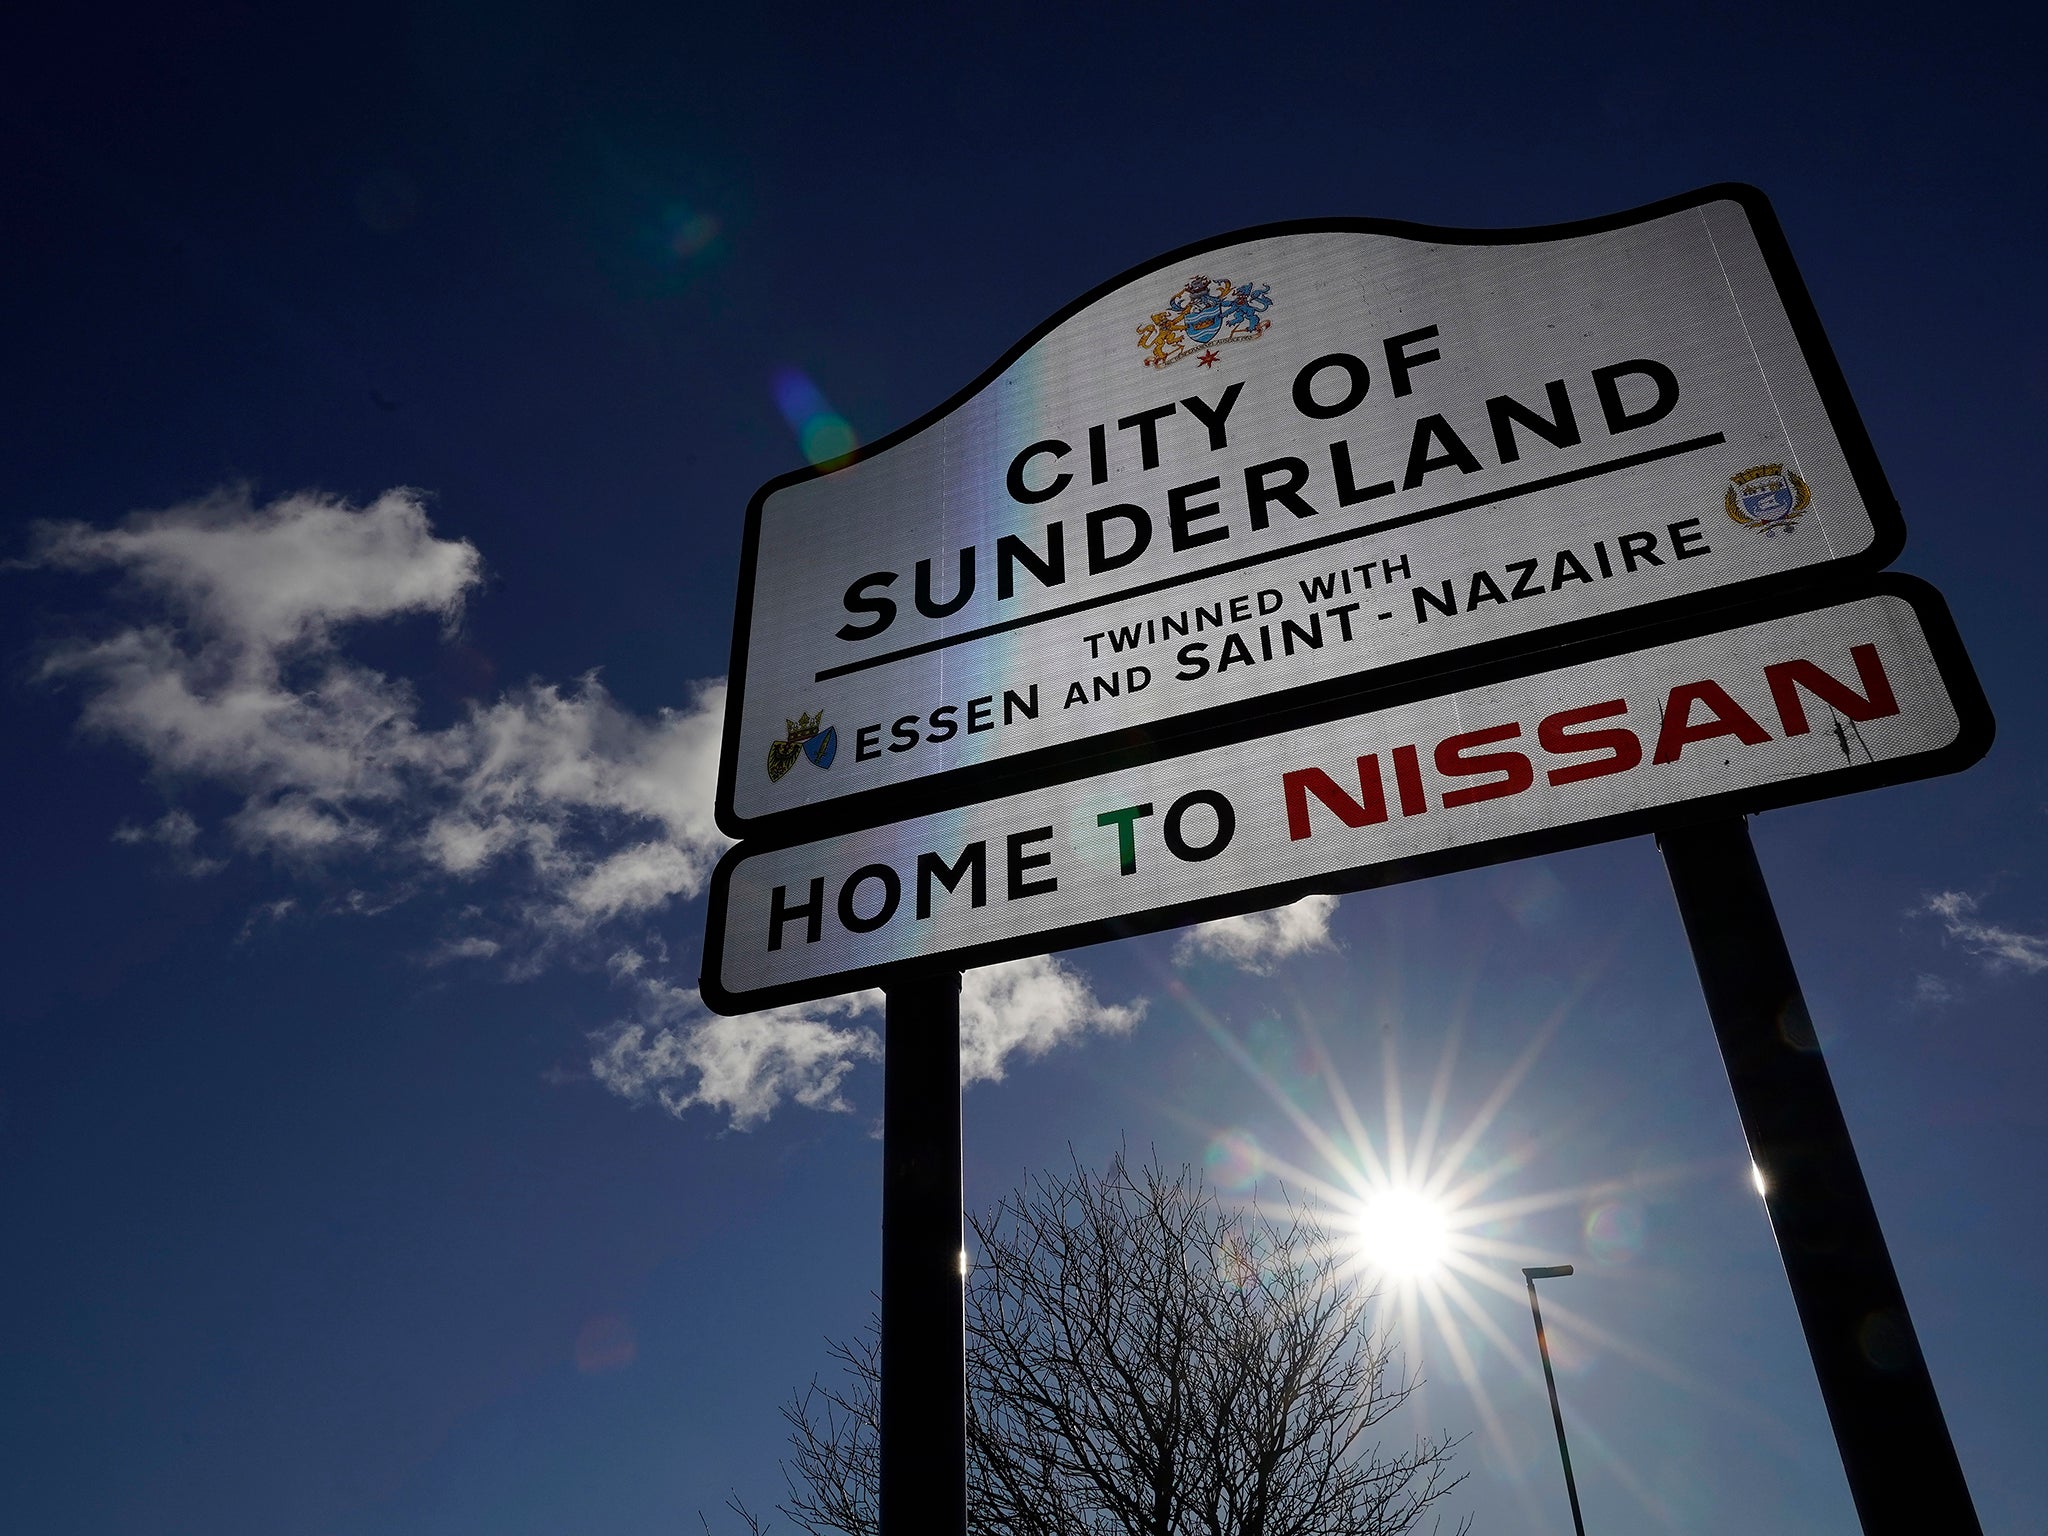 A sign at the Sunderland car assembly plant of Nissan